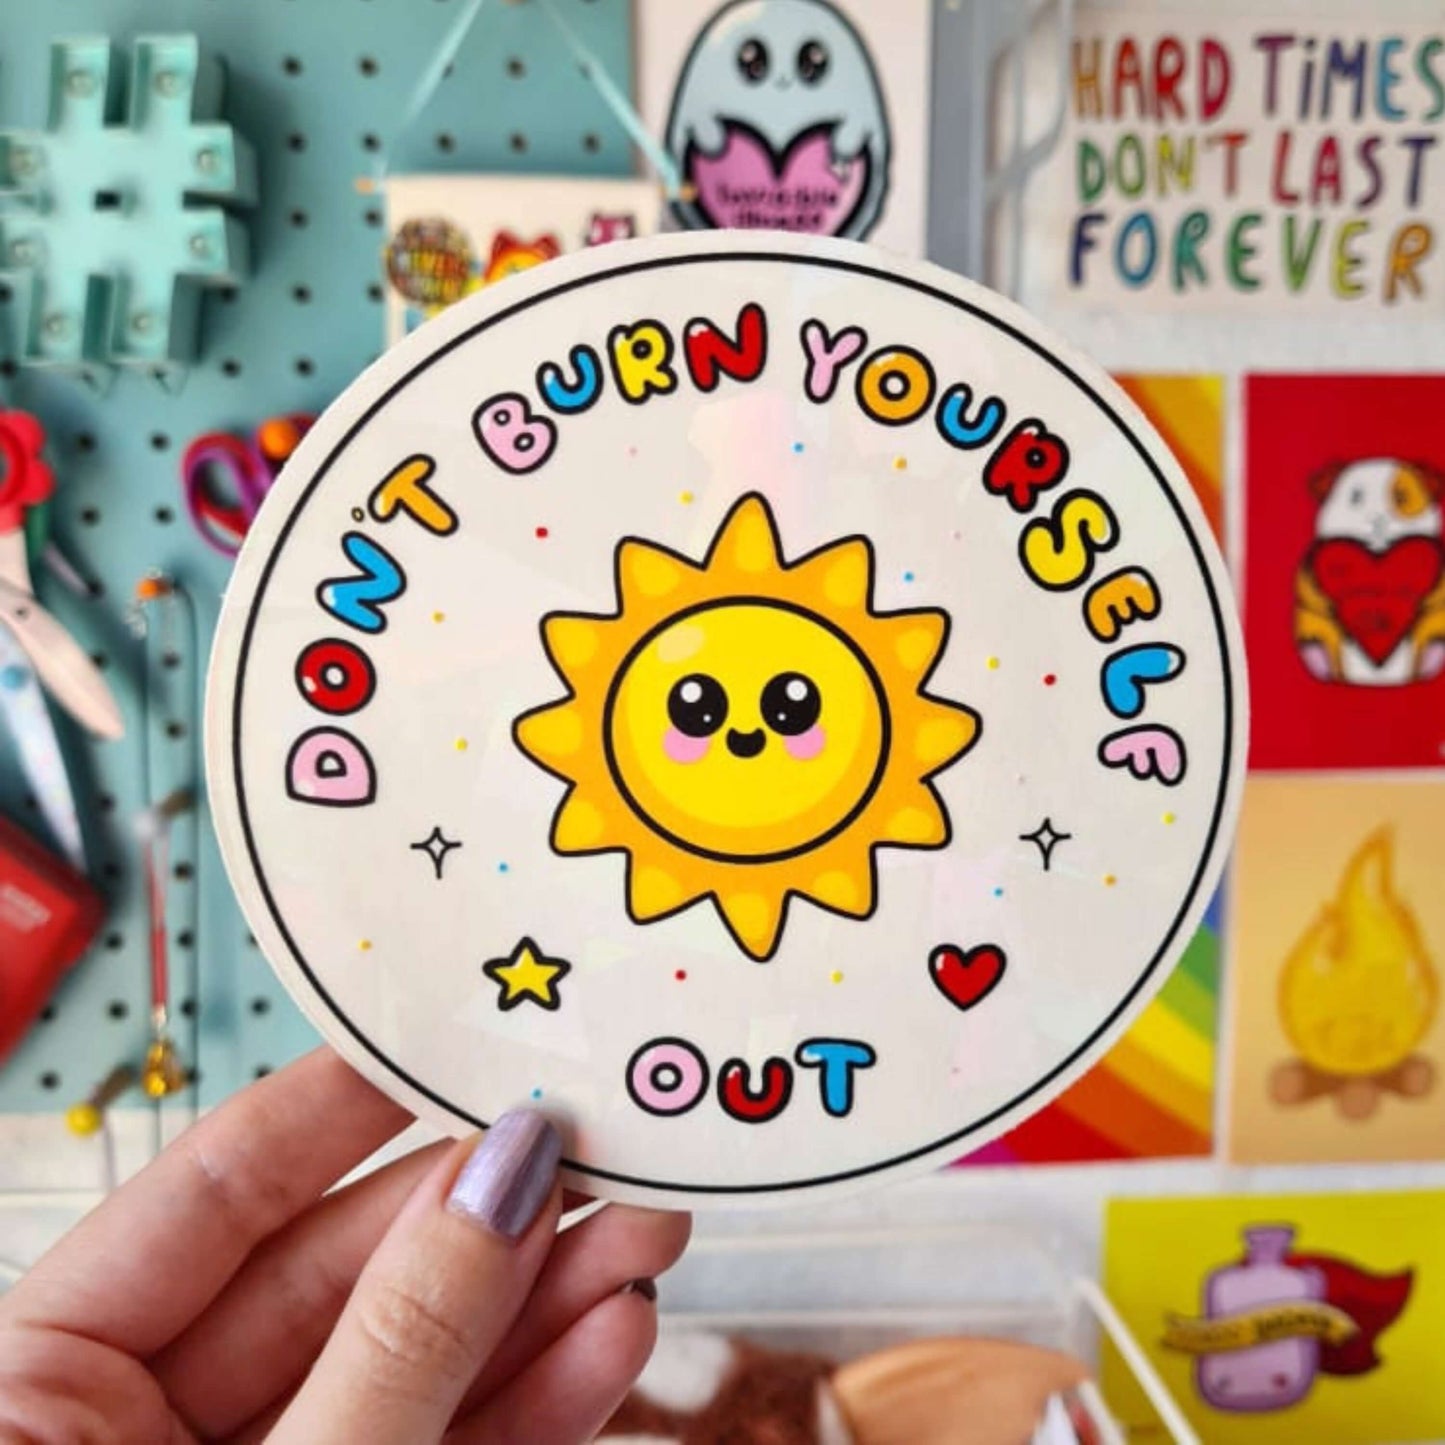 The Don't Burn Yourself Out Sun Catcher Rainbow Window Sticker being held up in front of a blue pinboard with other innabox products. The circle holographic sticker features a smiling sunshine with pink blush in the middle with rainbow bubble writing reading 'don't burn yourself out' with a yellow star, red heart, black sparkle outlines and rainbow dots all over. The design is inspired by self care.